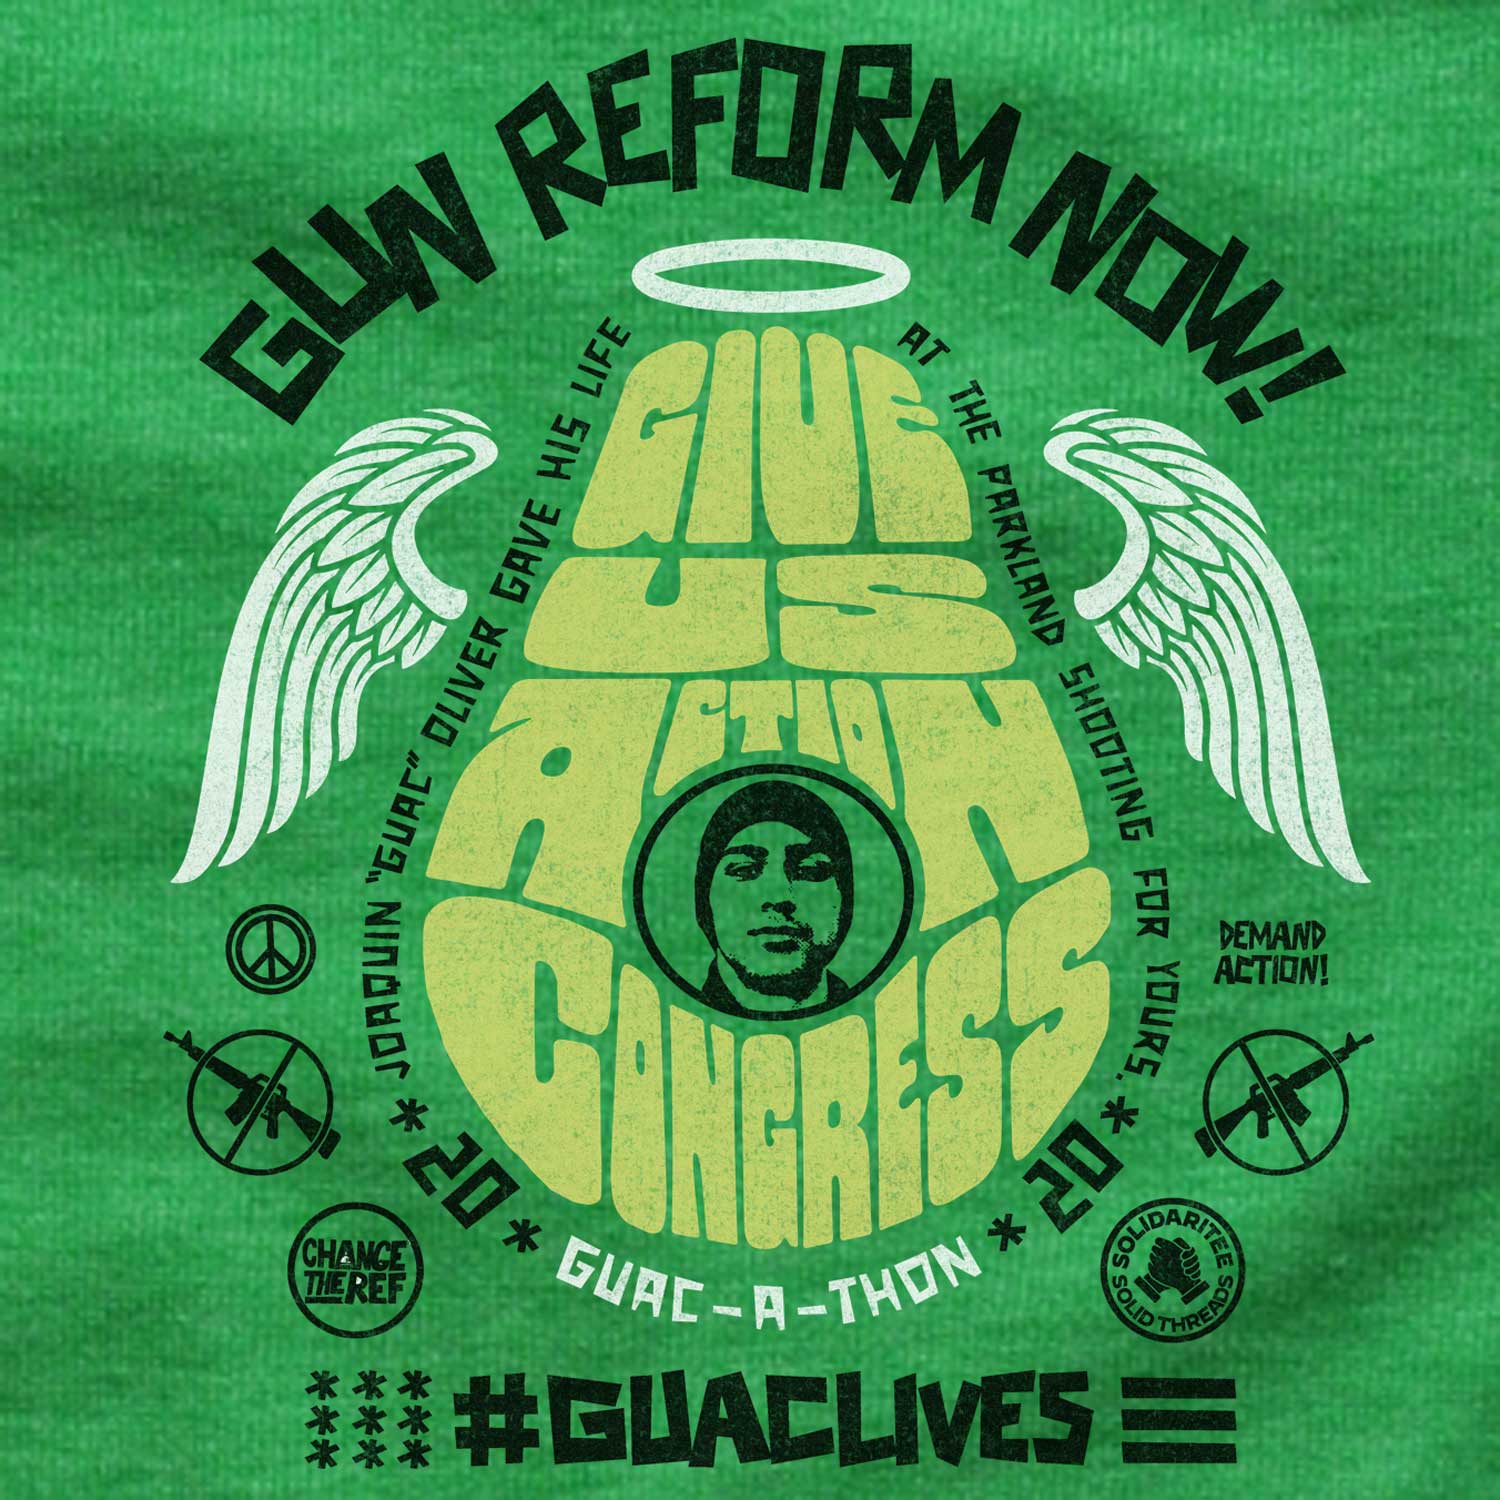 Baby Guac live give us action congress vintage inspired gun reform tee shirt with cool retro protest graphic | #GUAClives in SolidariTEE with Change The Ref